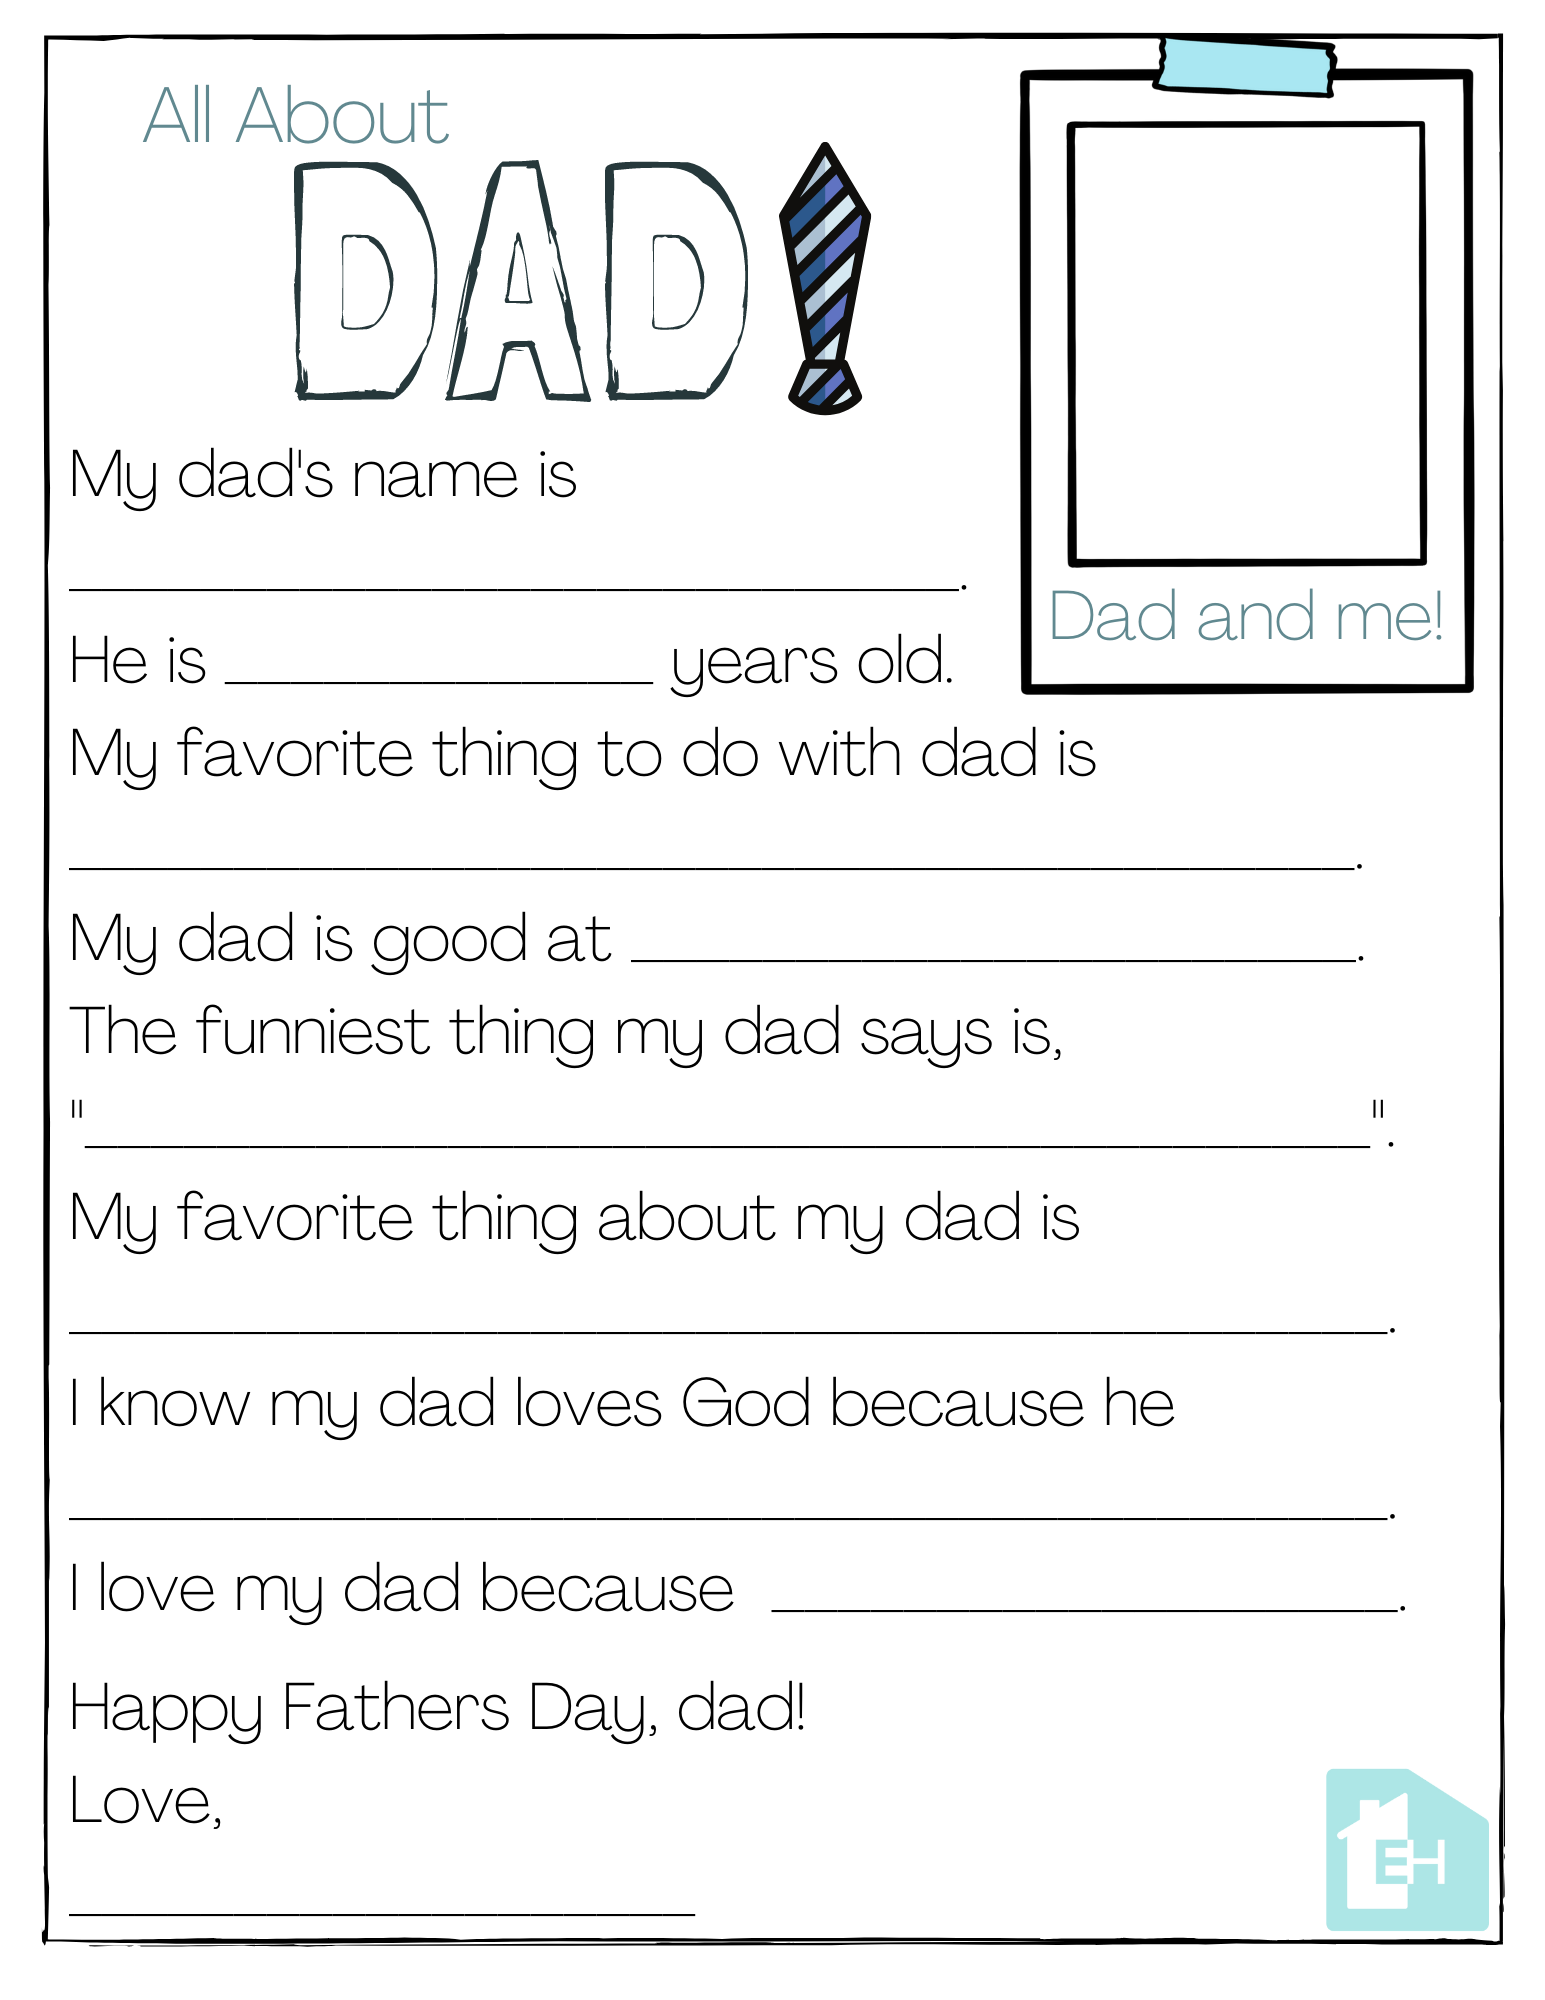 all-about-my-dad-printable